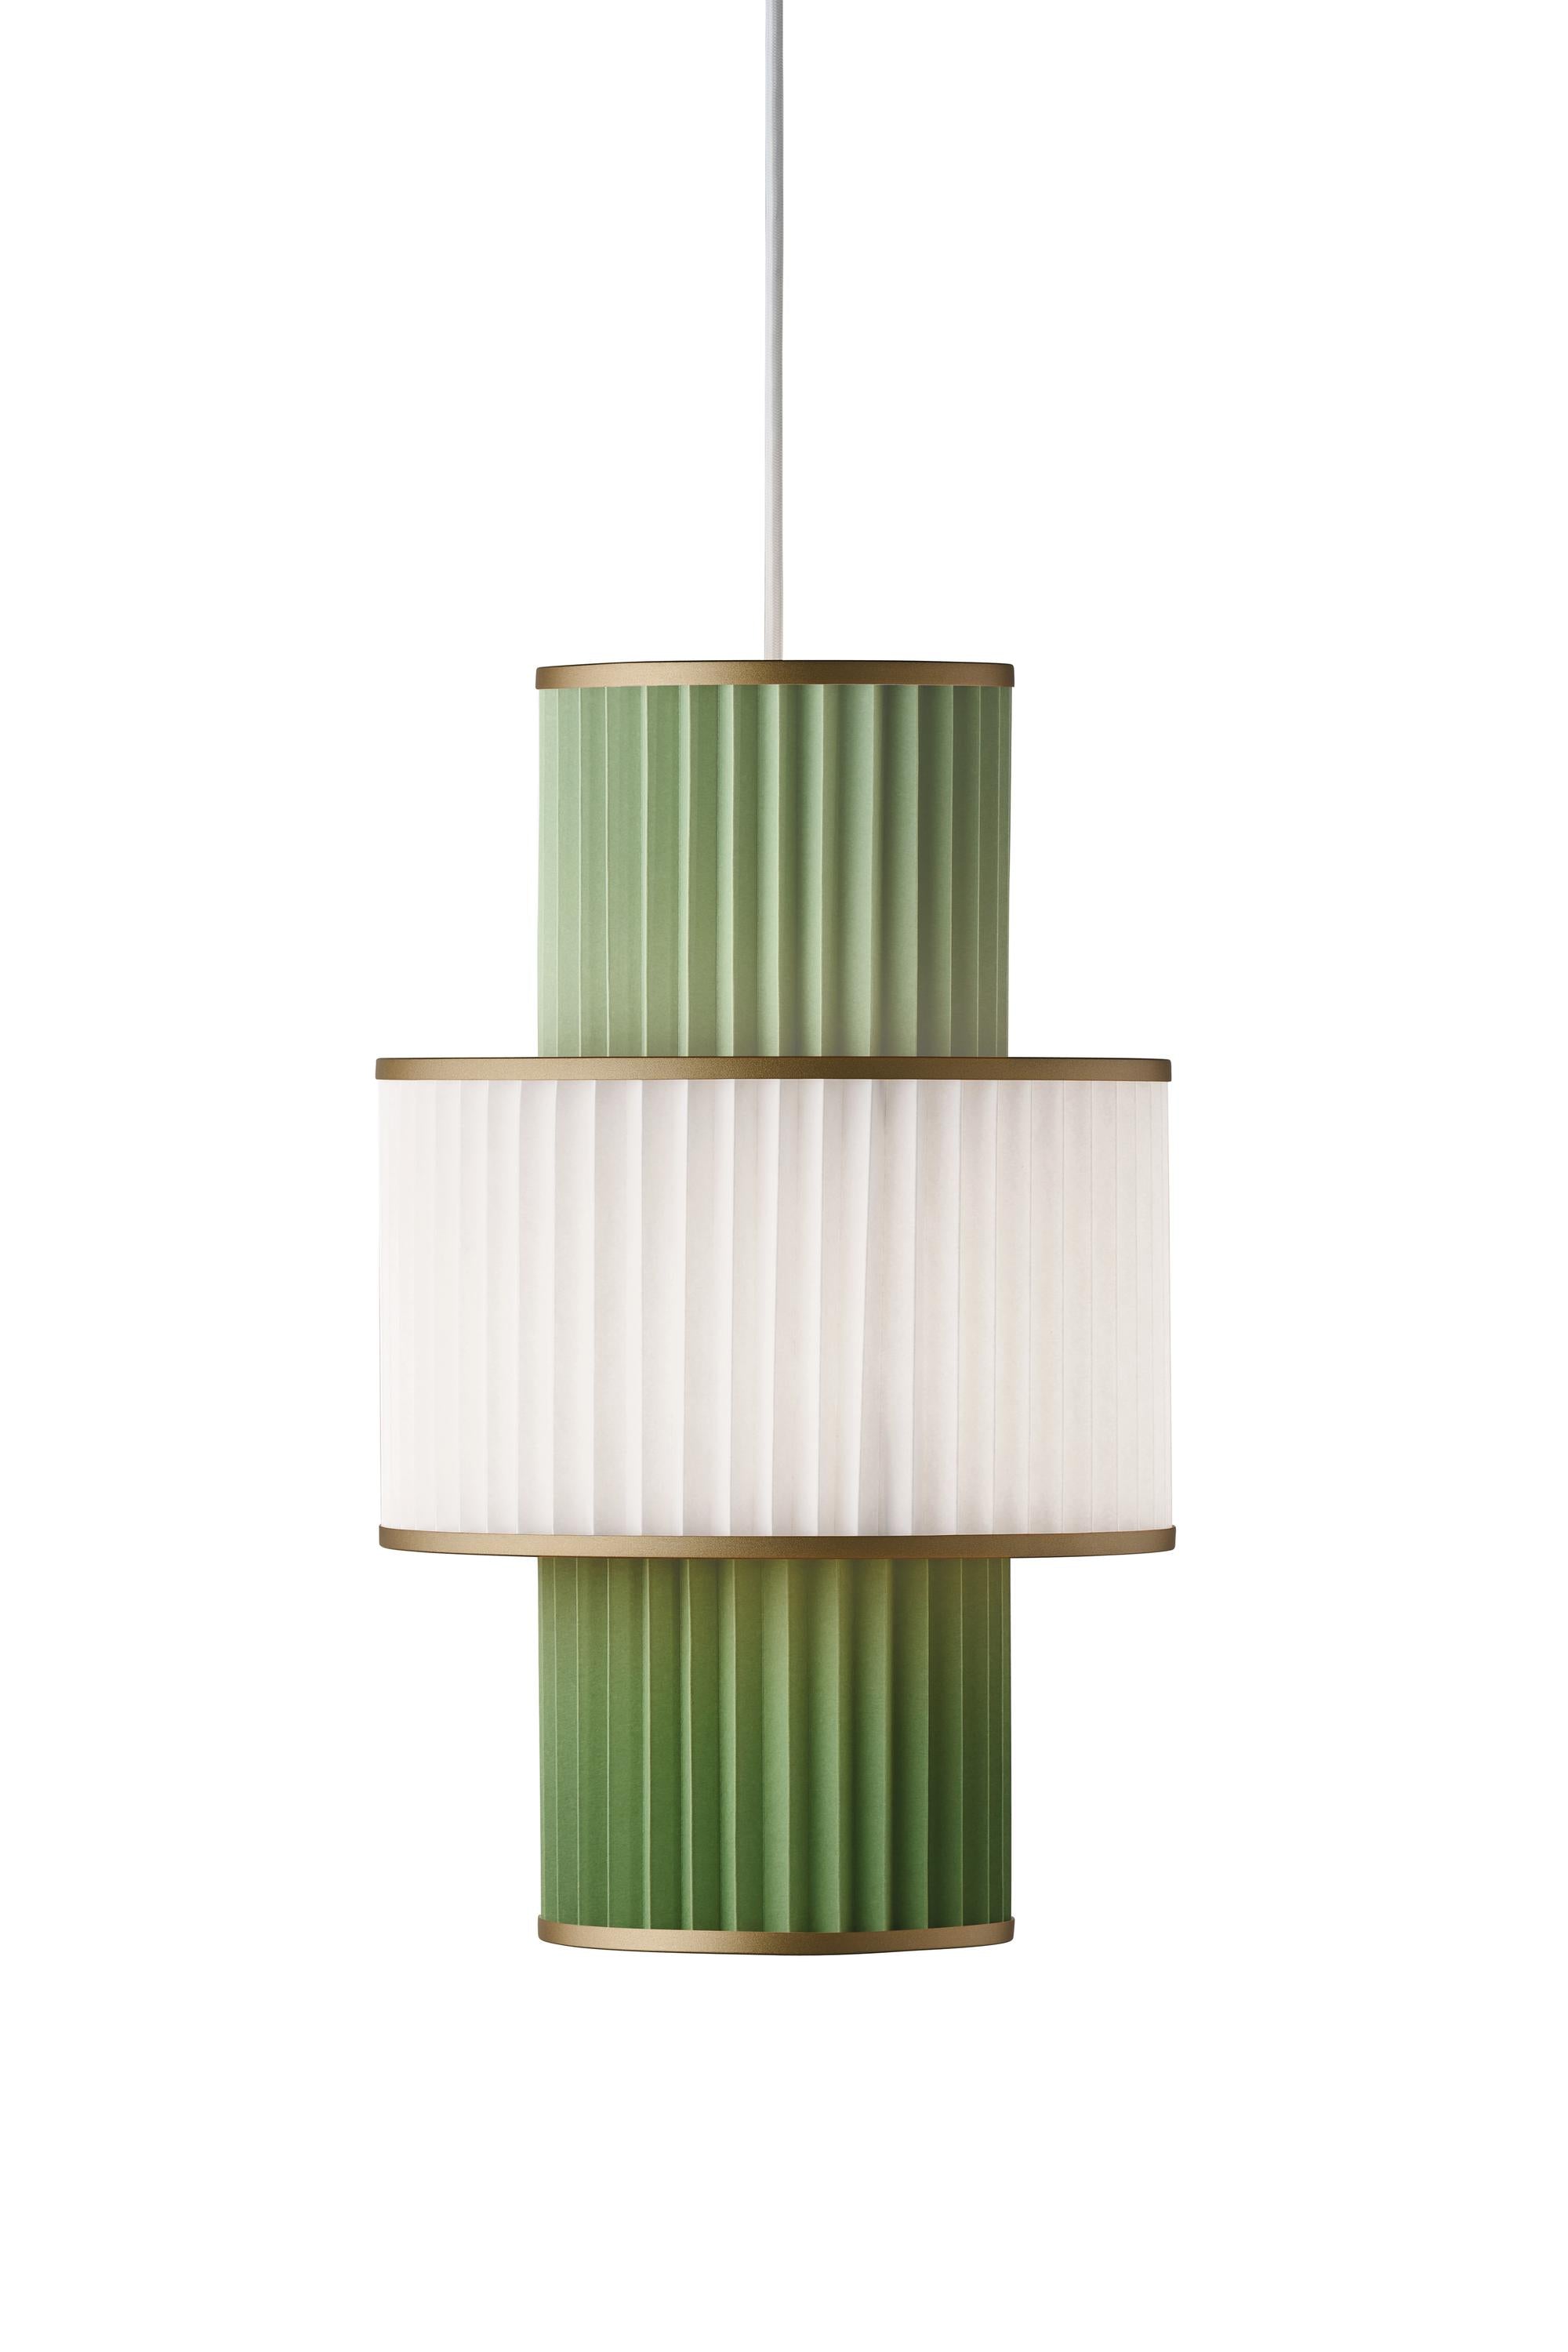 Le Klint Plivello Suspension Lamp Golden/White/Light Green With 3 Shades (S M S)